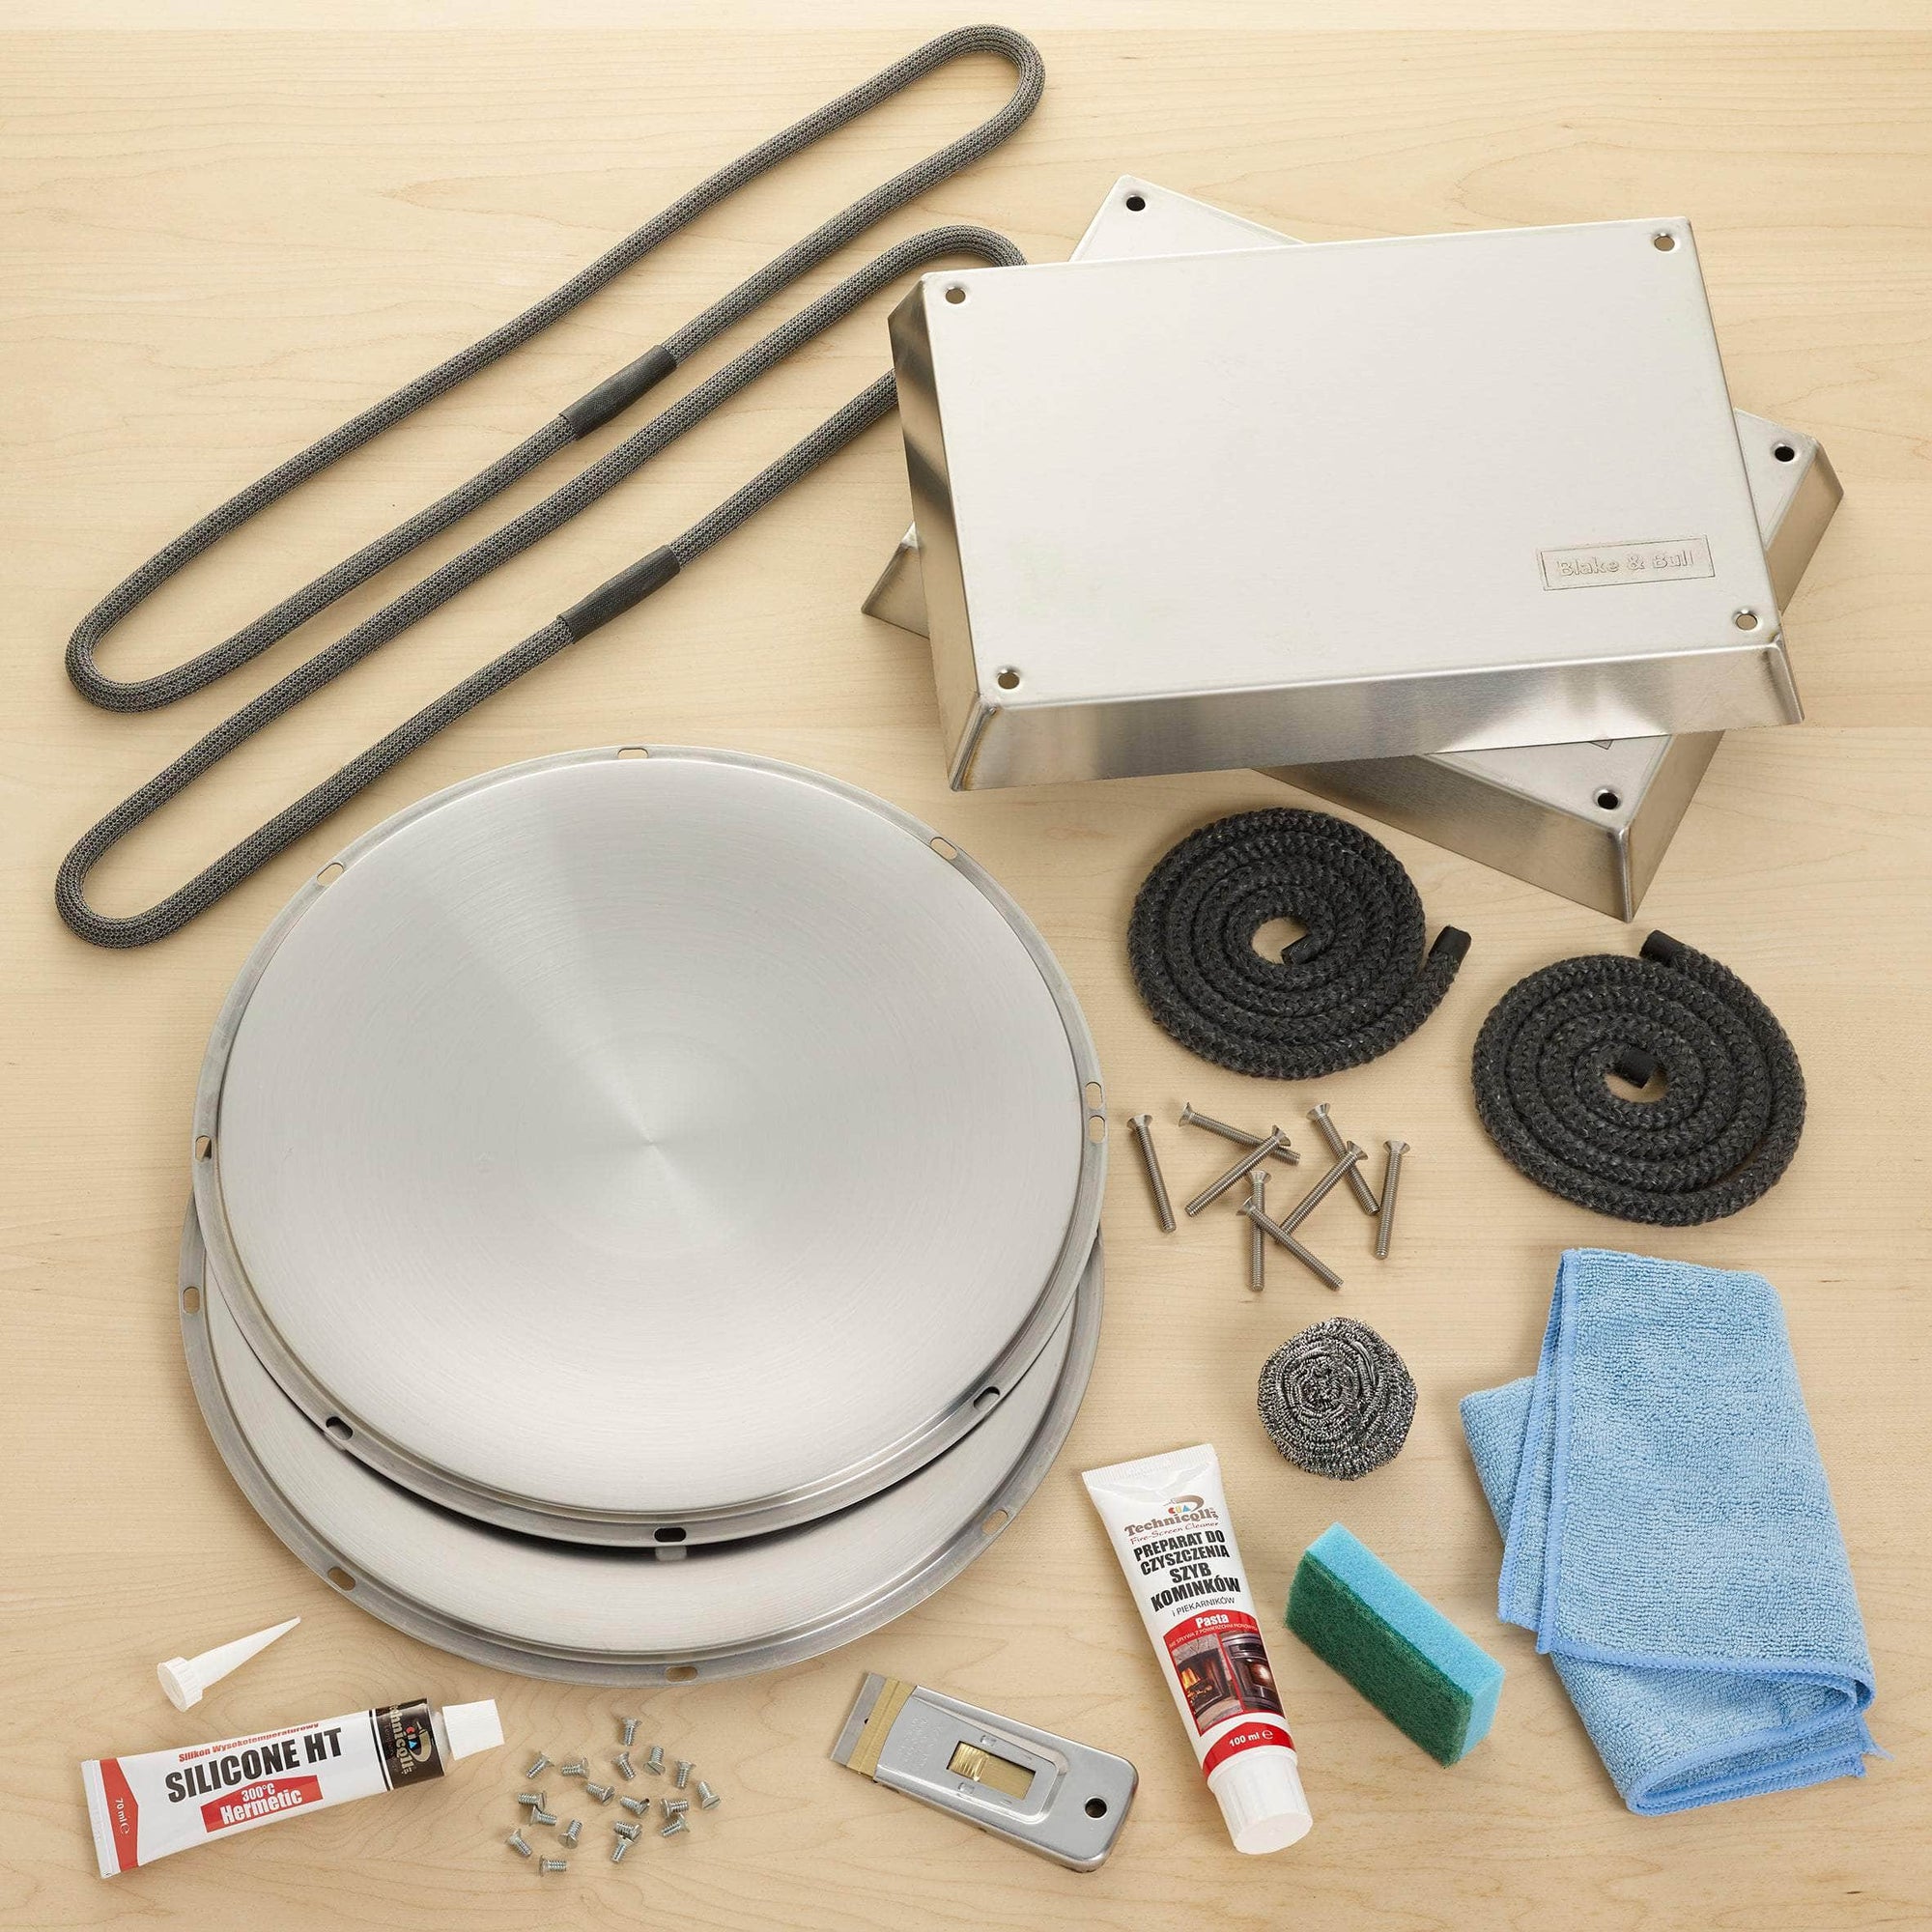 Stainless steel DIY cleaning & mini-refurb kit for use with Aga range cookers